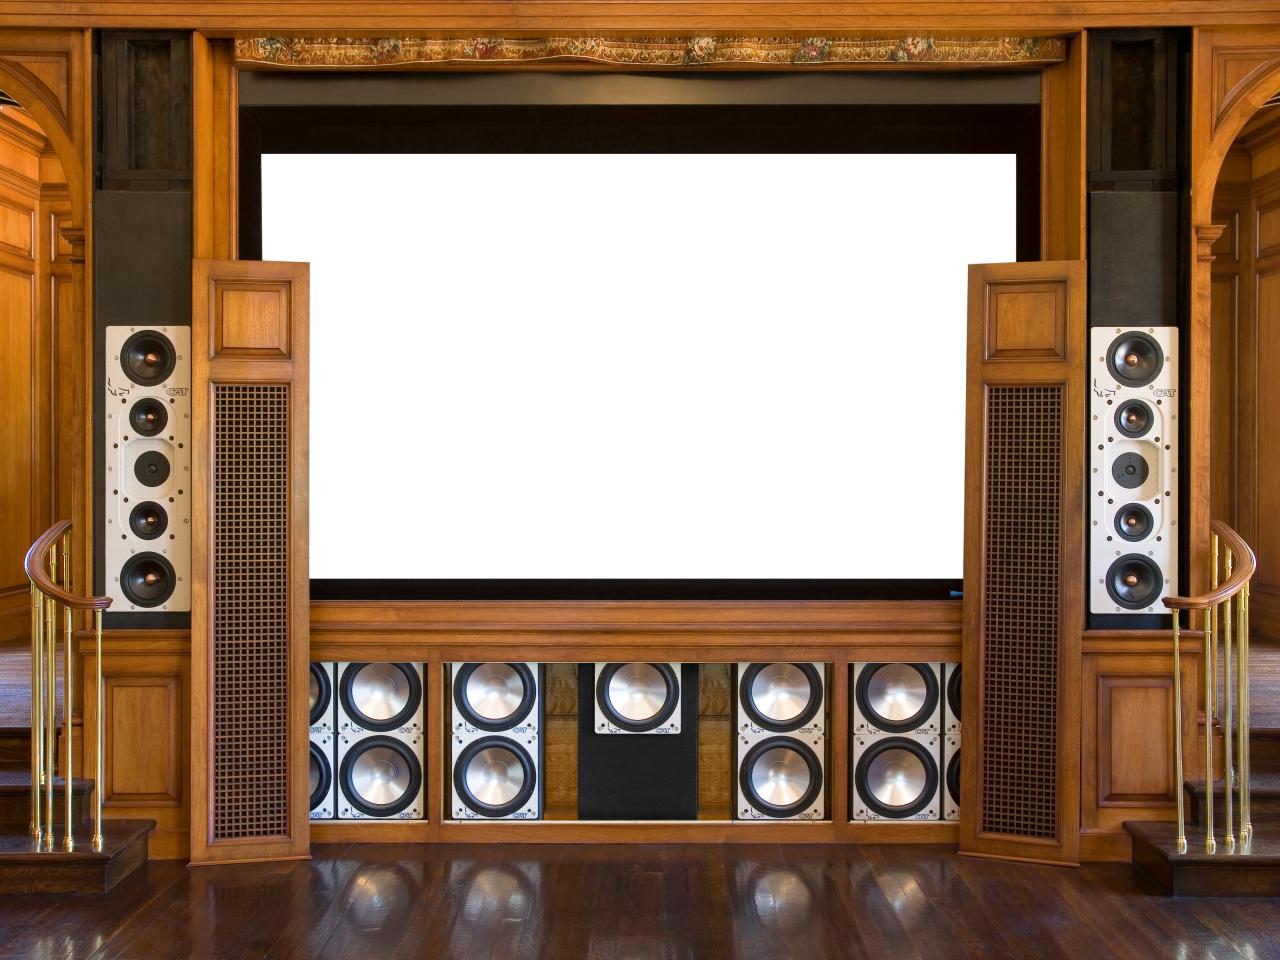 Pics of DIY Speakers. - Home Theater Forum and Systems 